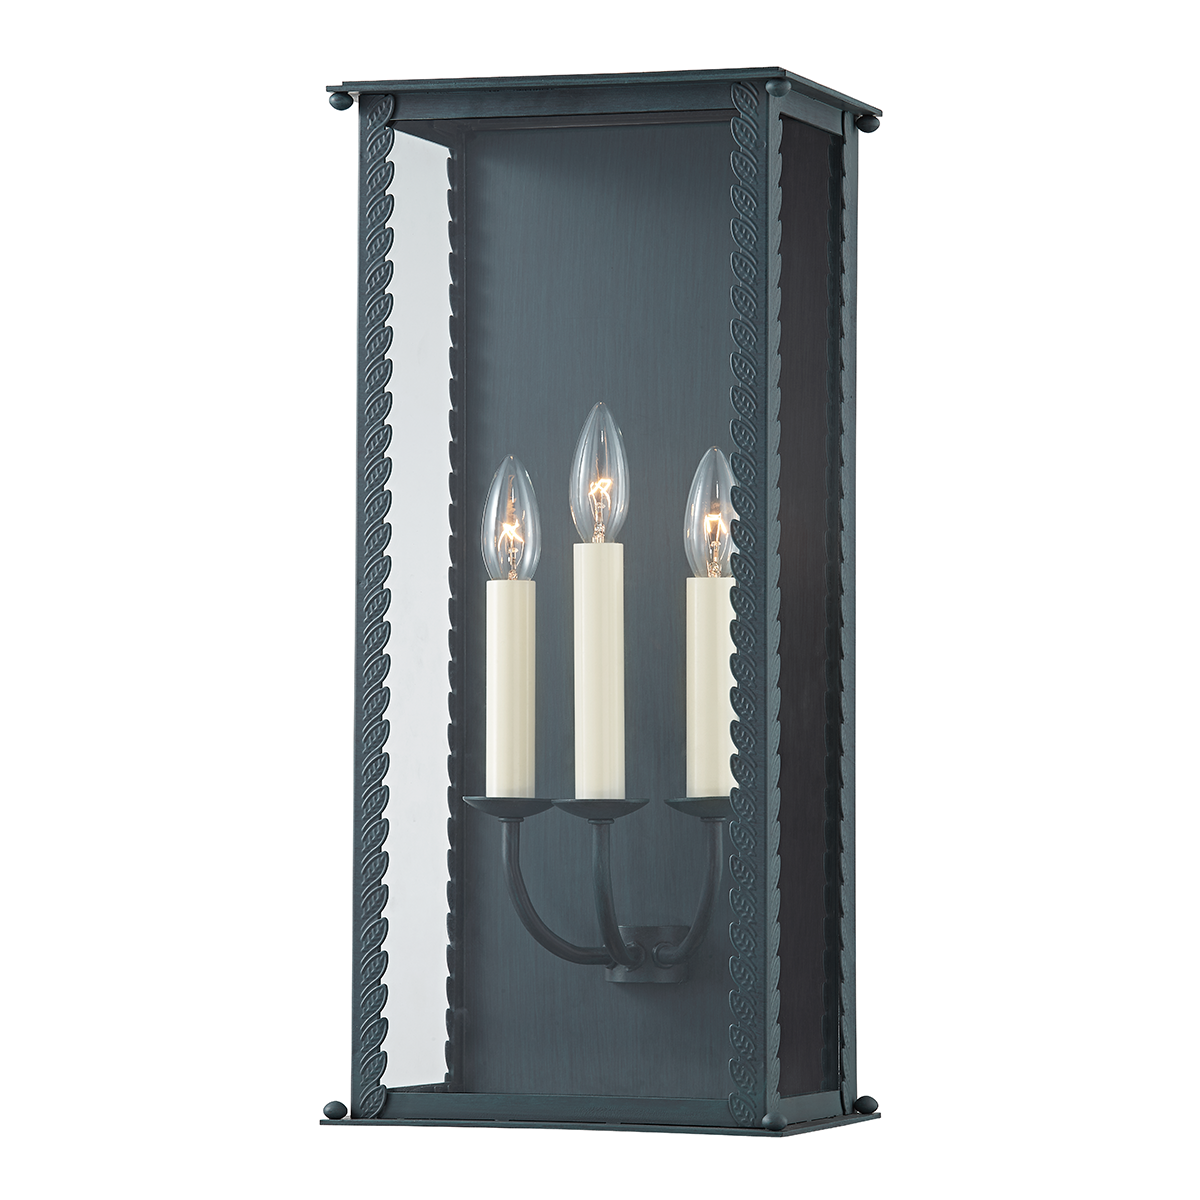 Troy Lighting 3 LIGHT LARGE EXTERIOR WALL SCONCE B6713 Outdoor l Wall Troy Lighting VERDIGRIS  